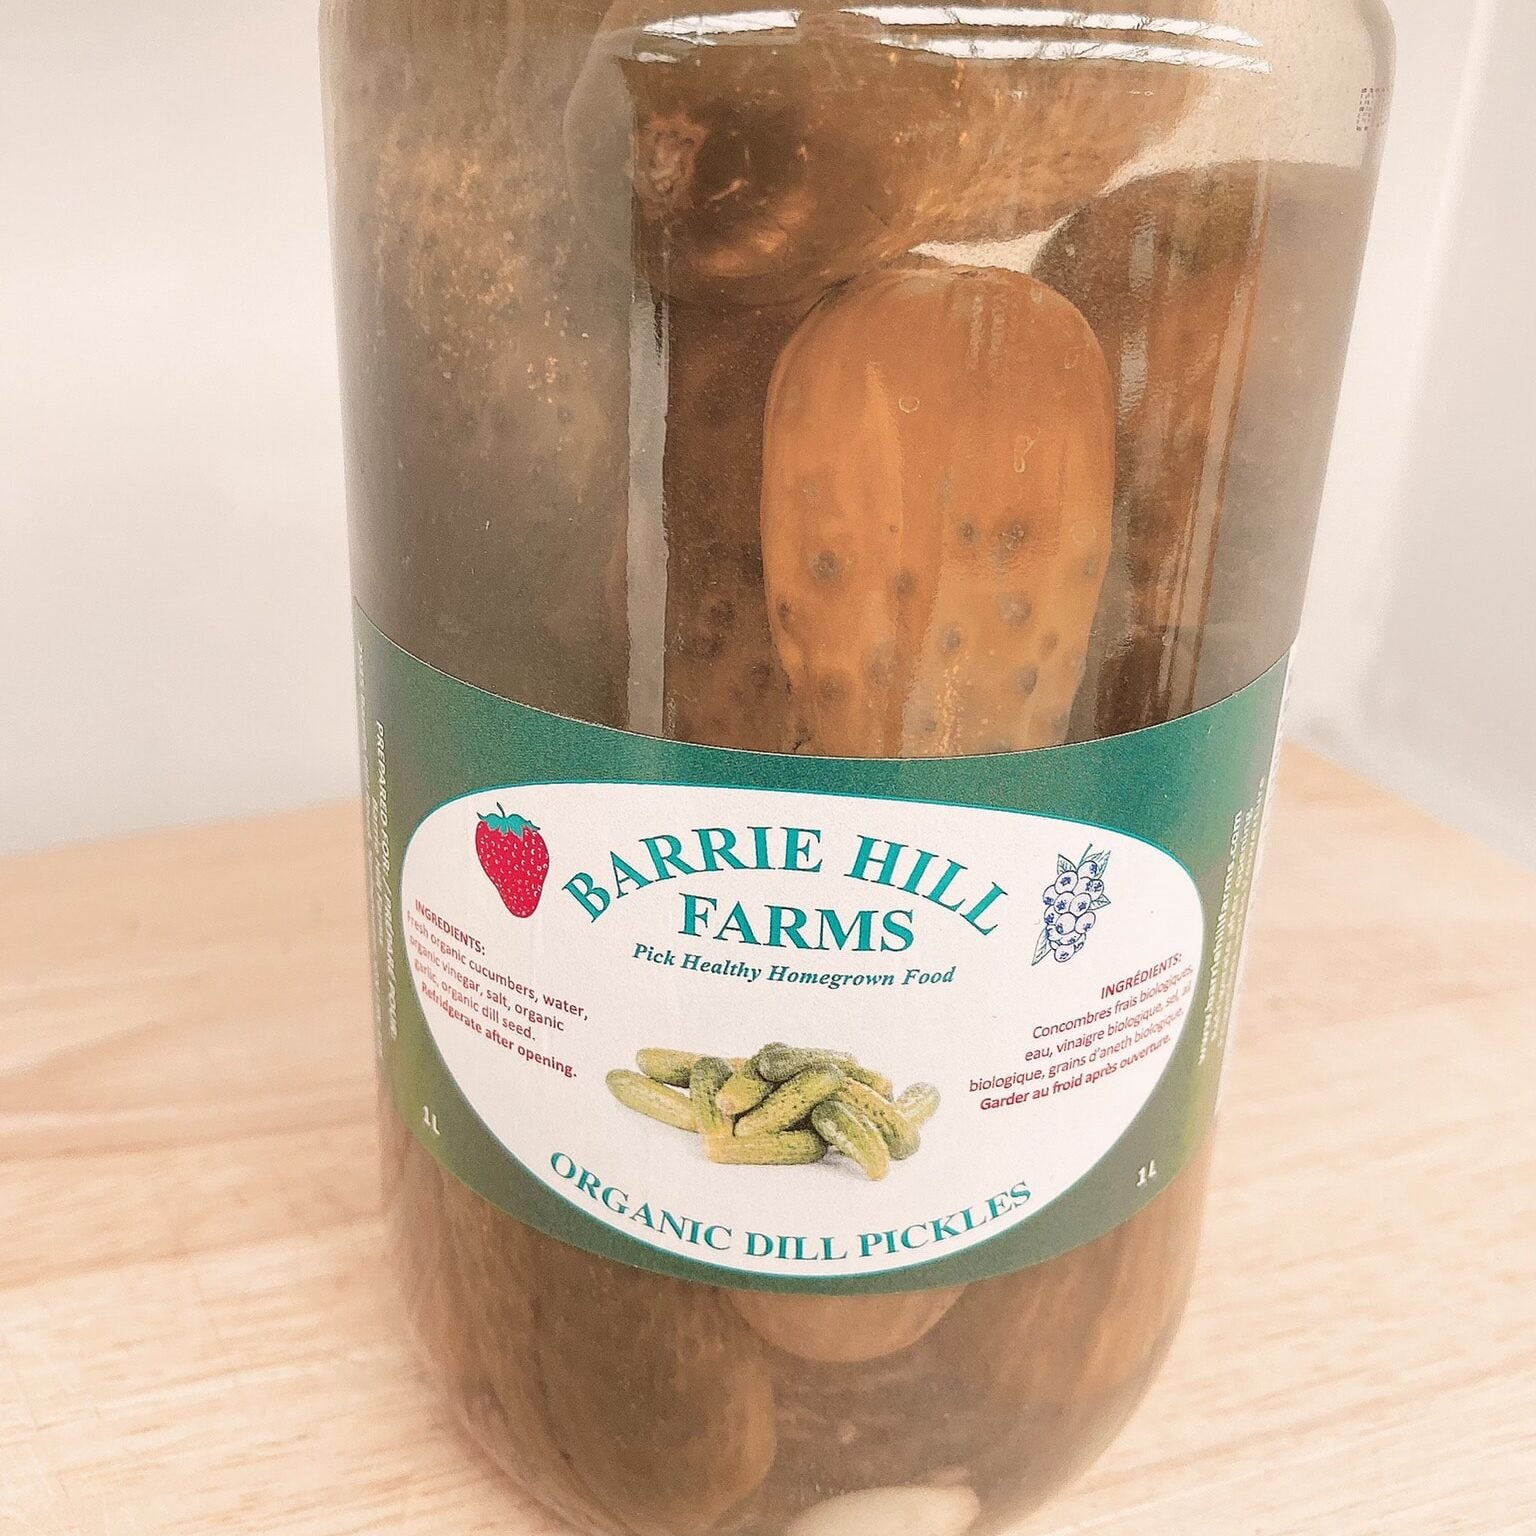 Barrie Hill Farms Dill Pickles